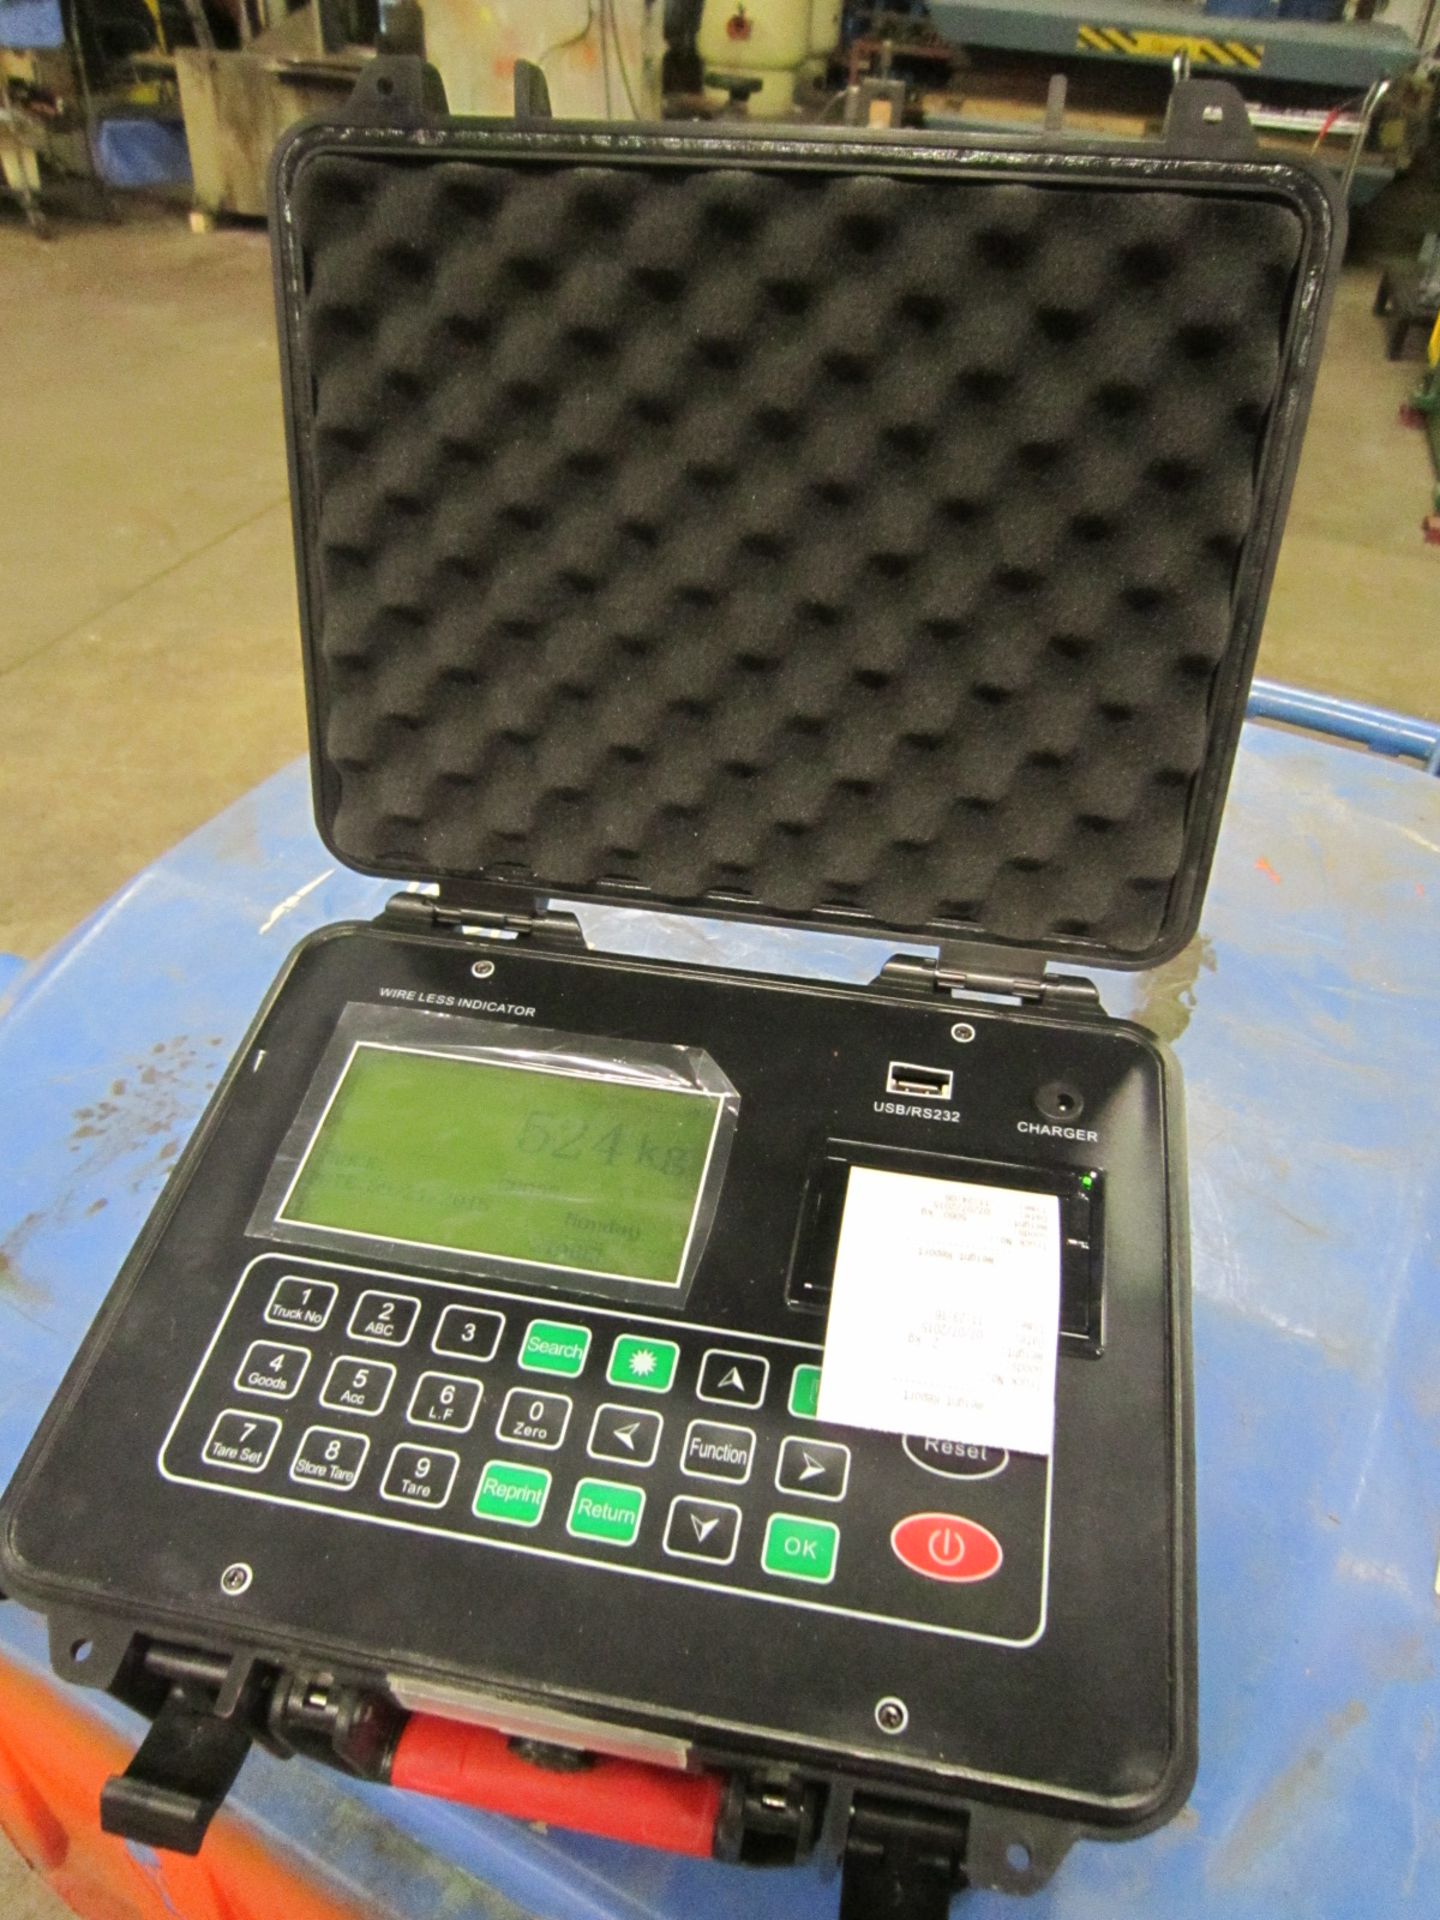 RW 20 TON Wireless Crane Scale with Digital Readout in Breifcase with charger up to 40000lbs - Image 2 of 2